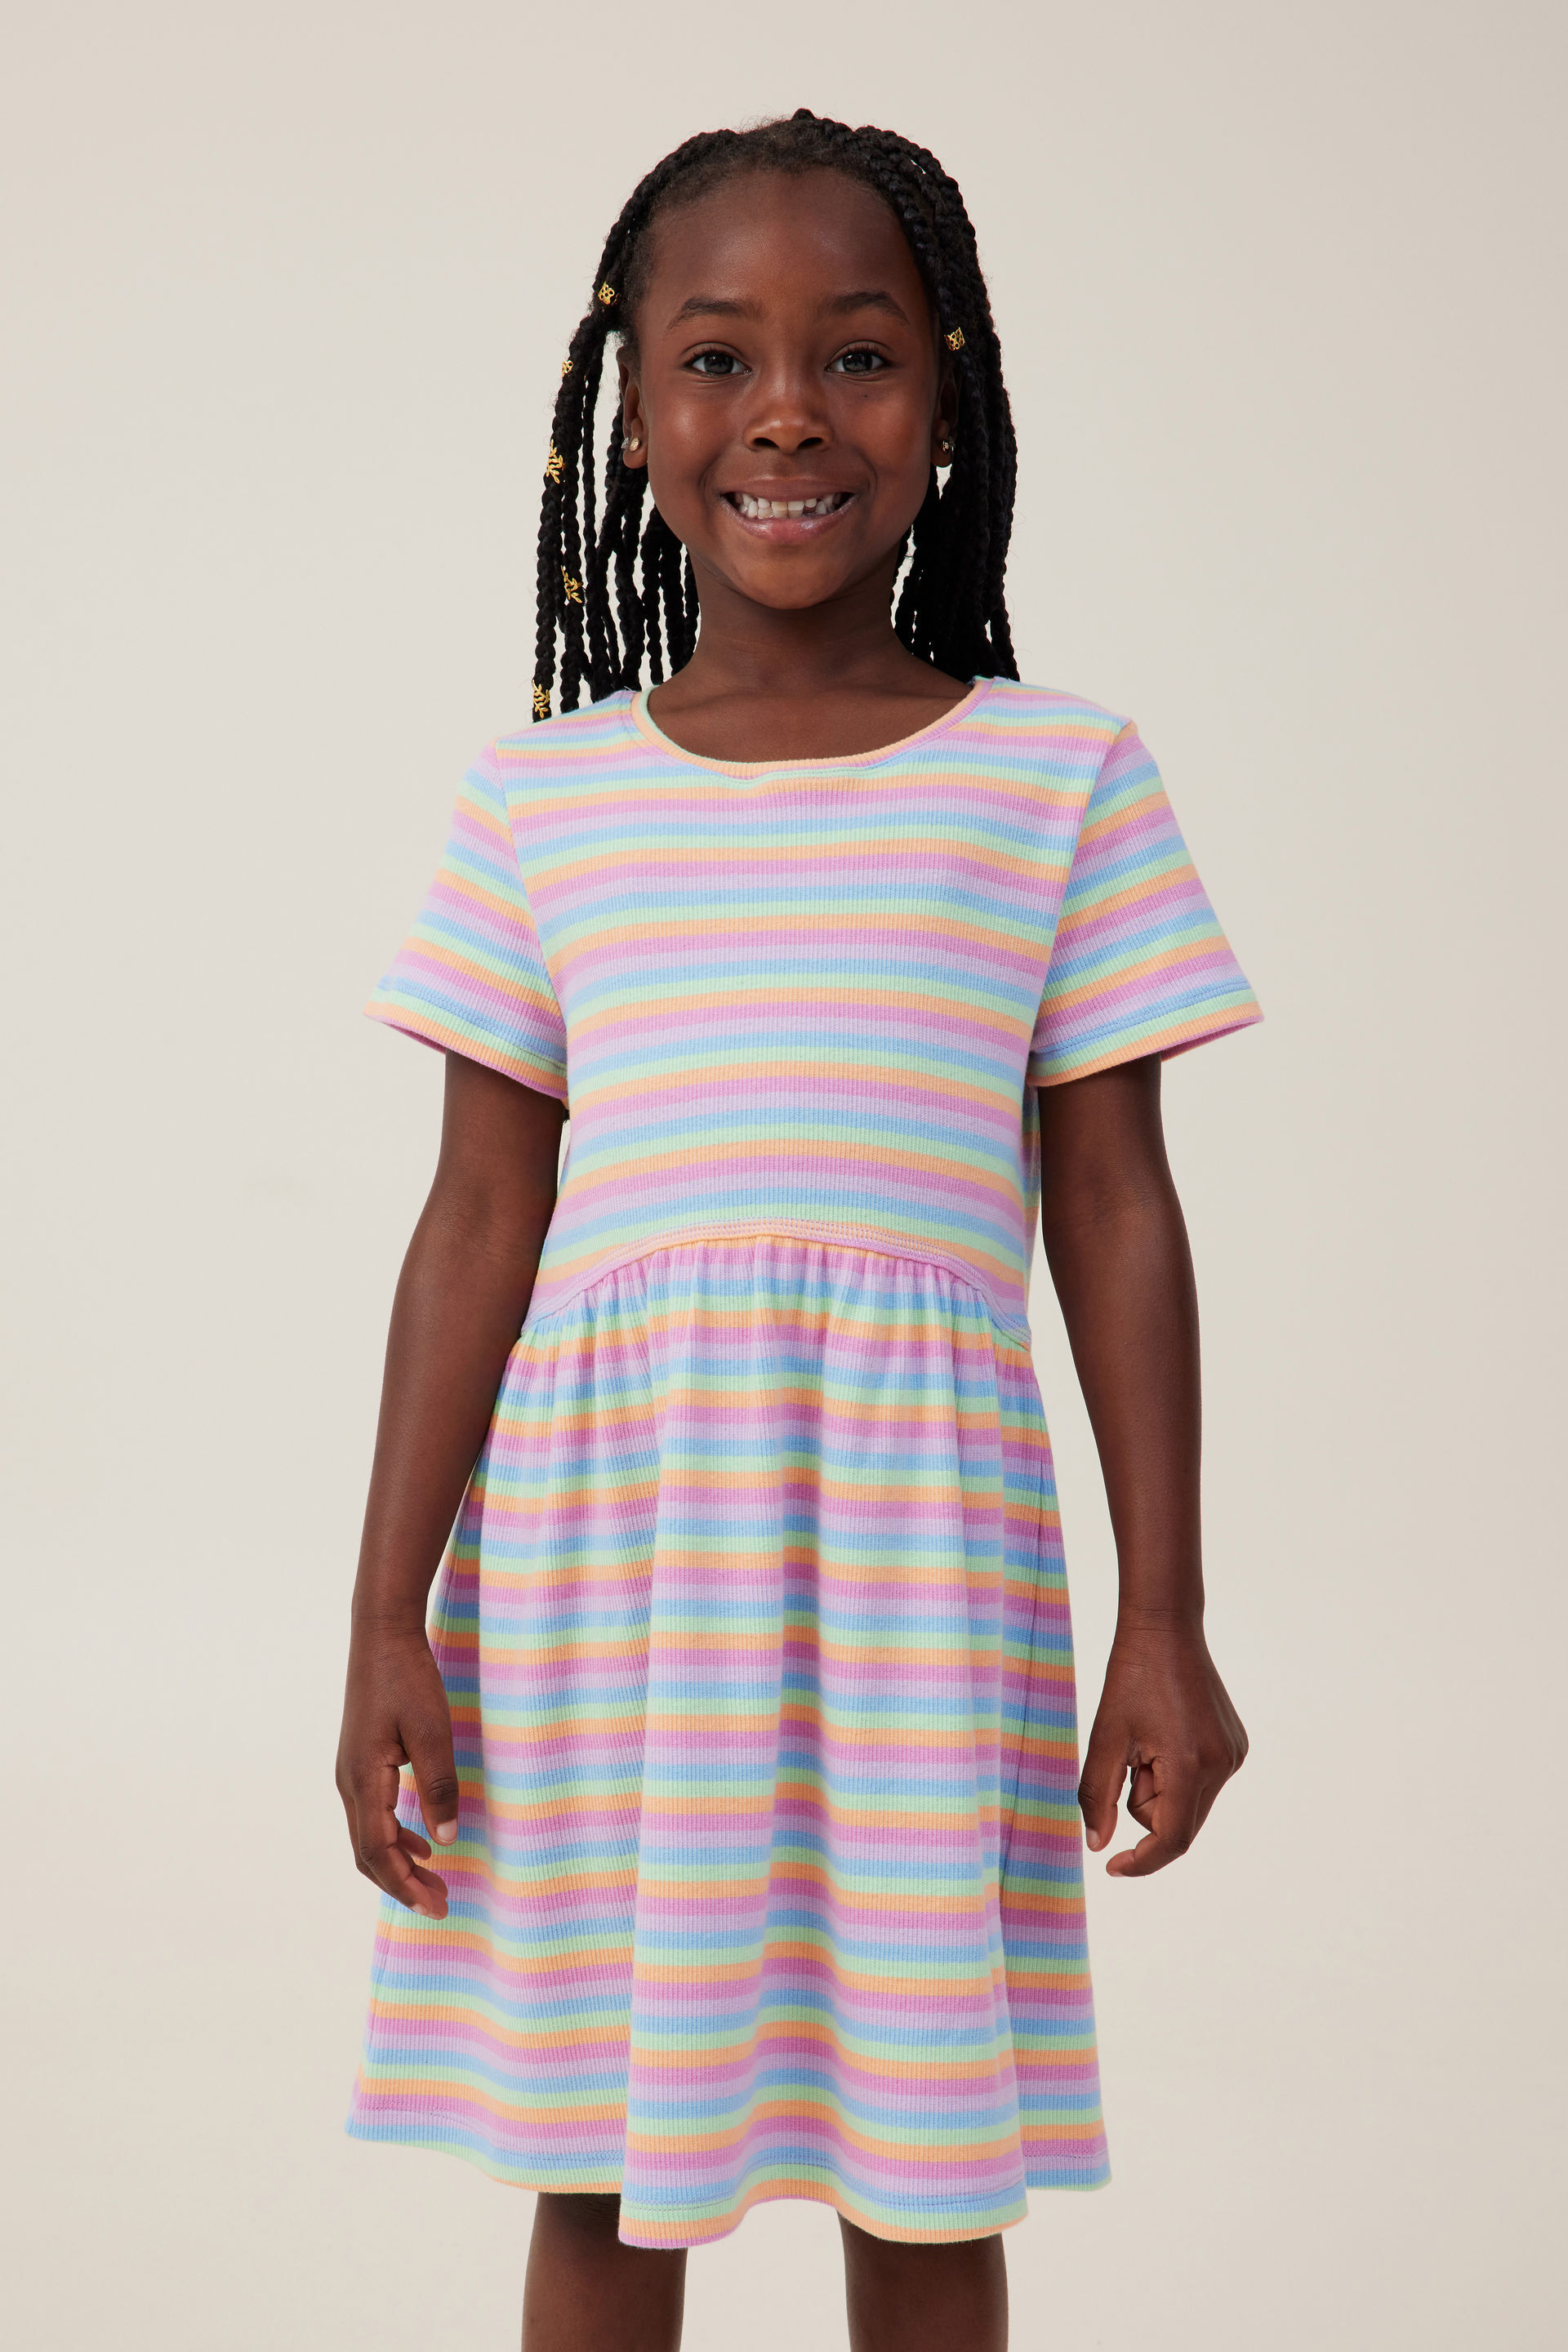 Pin by keisha walters on Patterns | African dresses for kids, African kids  clothes, Dress for girl child